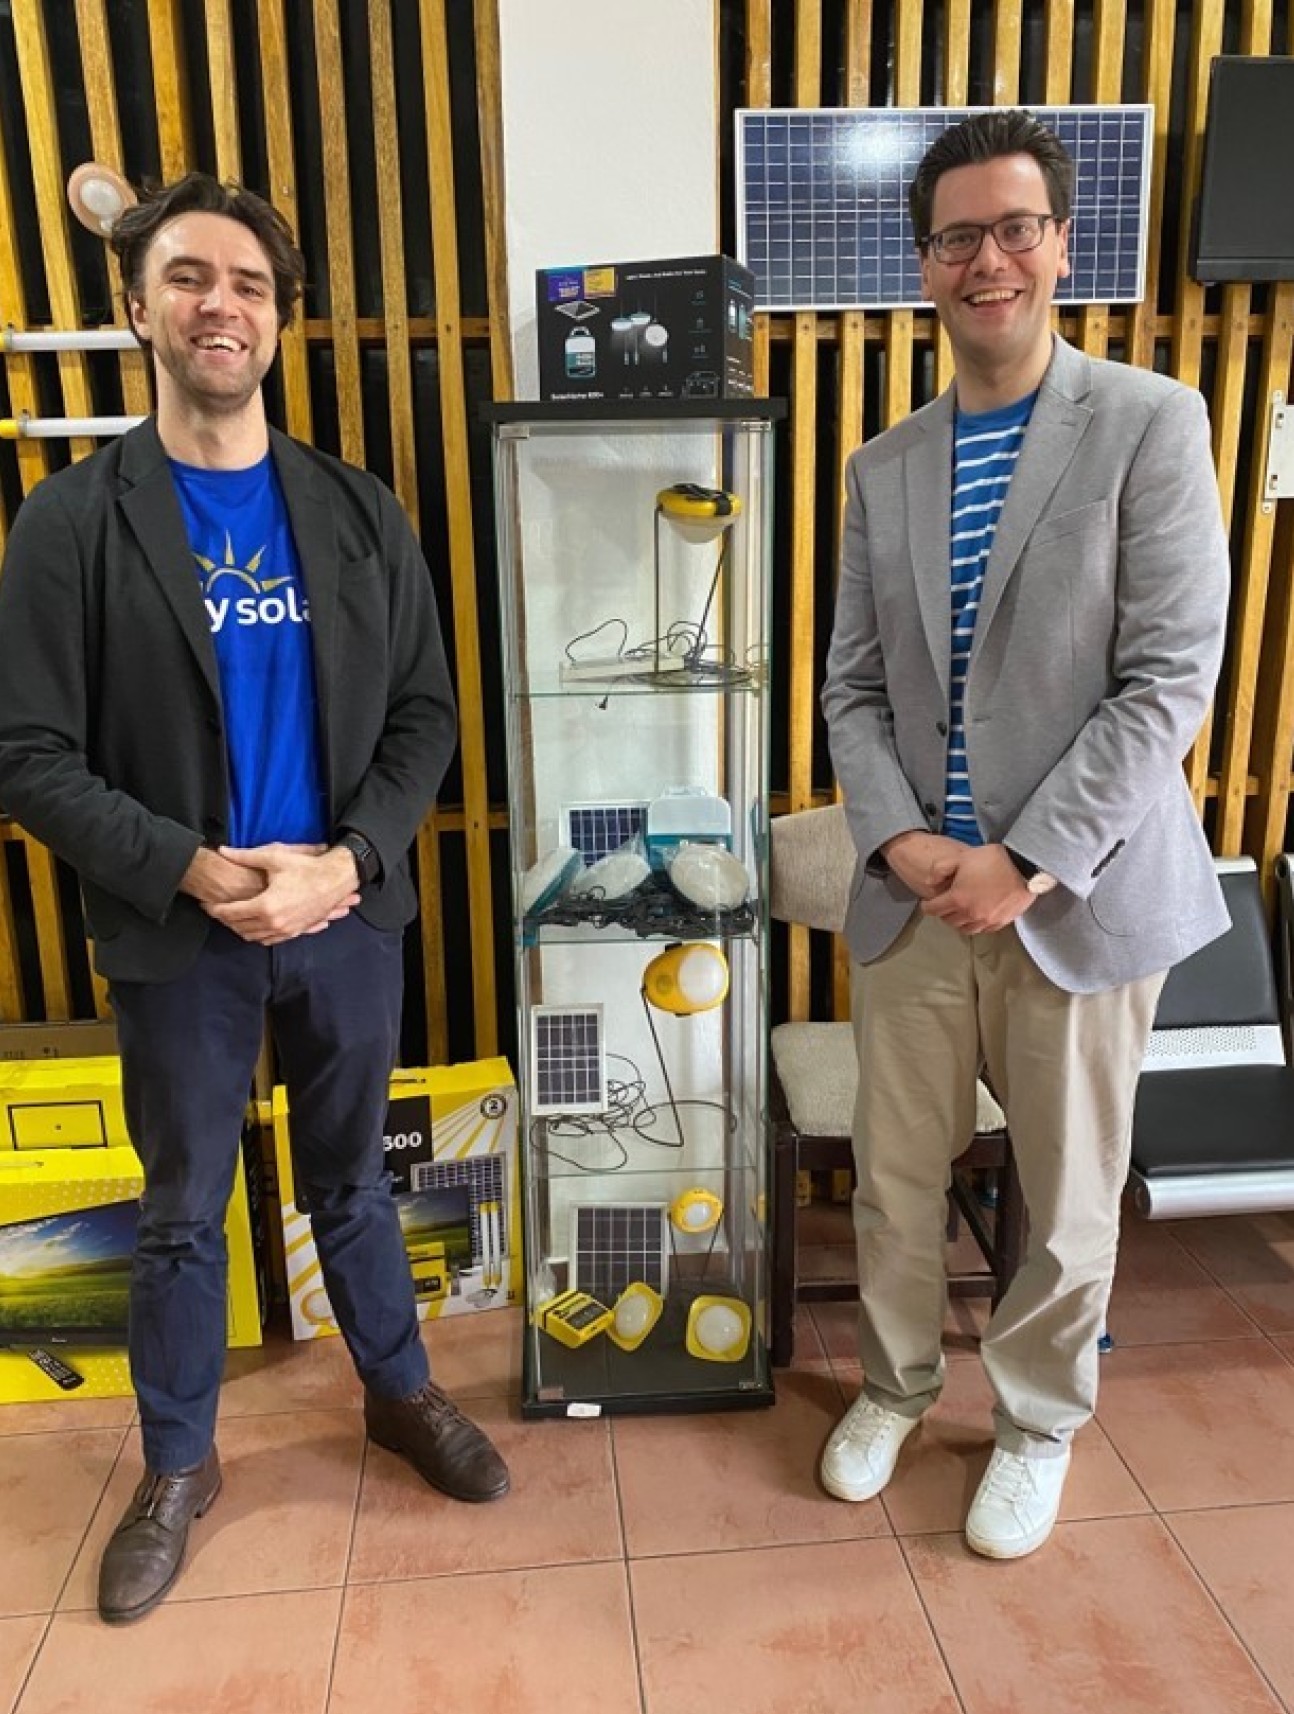 Professor Mike Templeton meets with Alexandre Tourre, Easy Solar